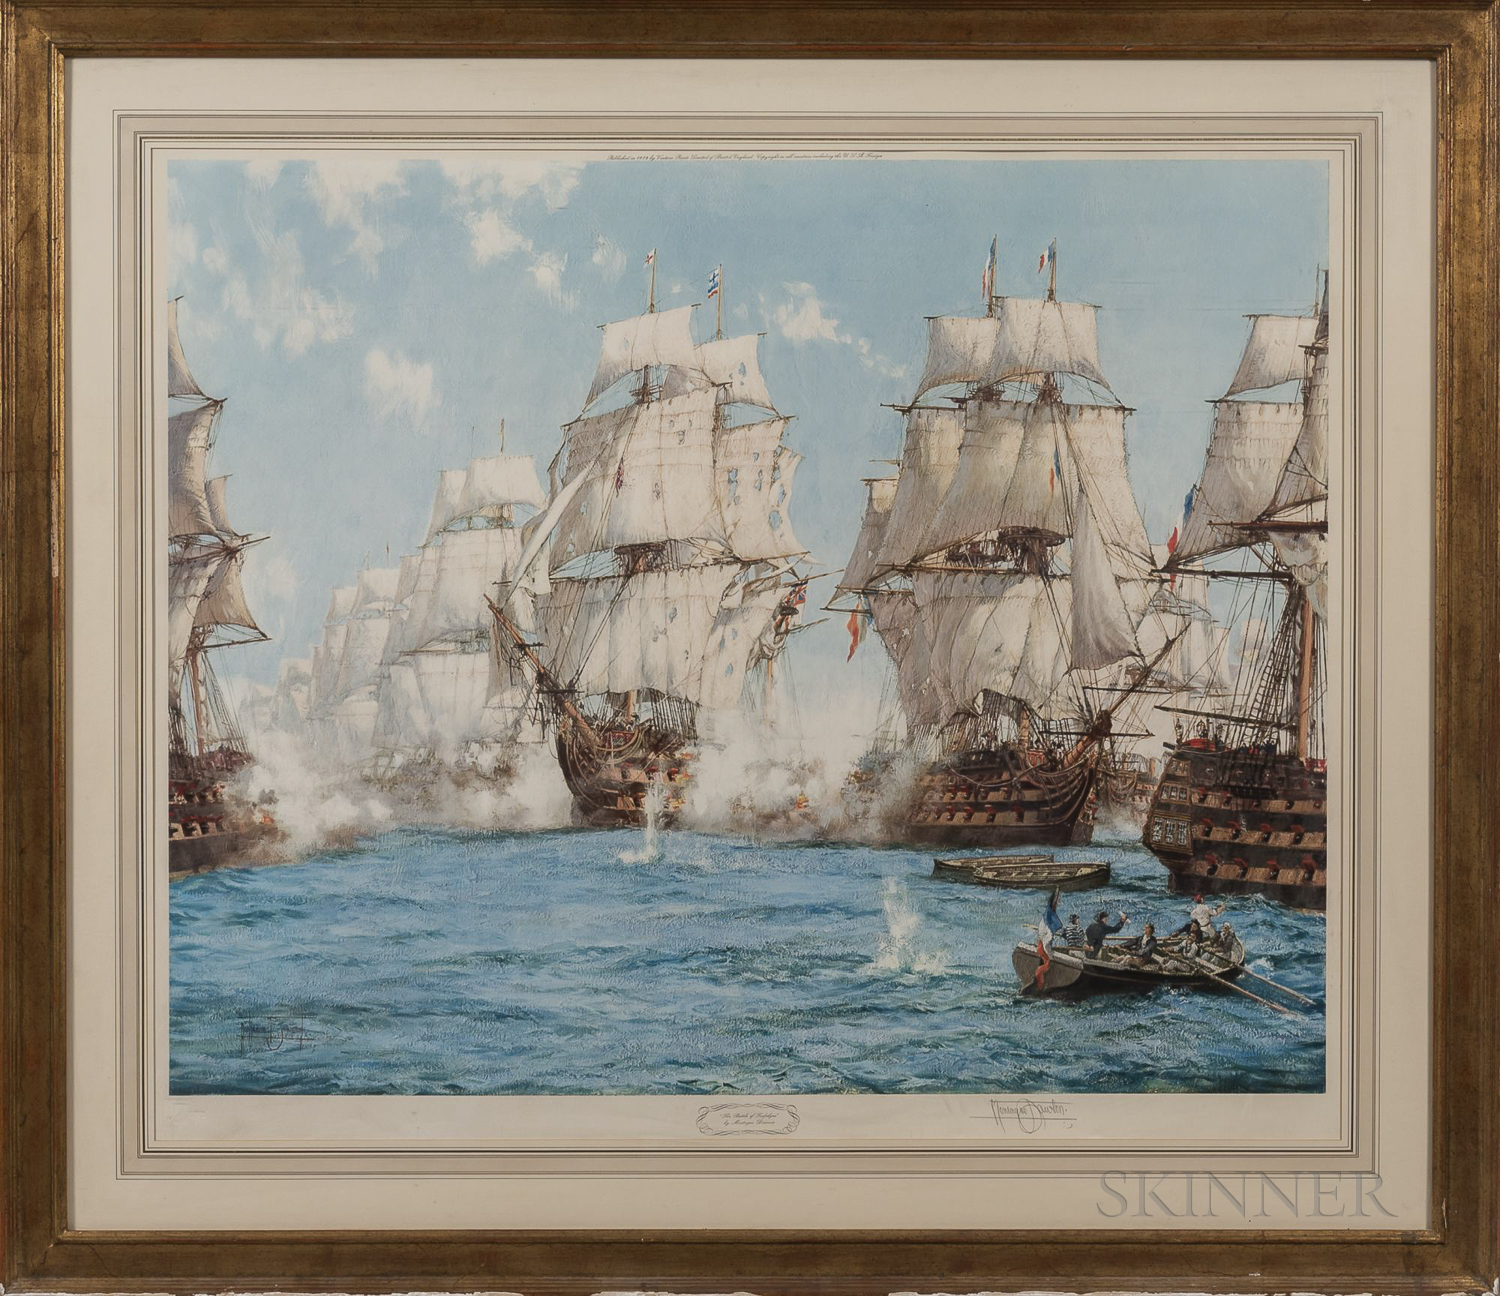 After Montague J. Dawson (British, 1890-1973), The Battle of Trafalgar, Signed in the matrix, signed